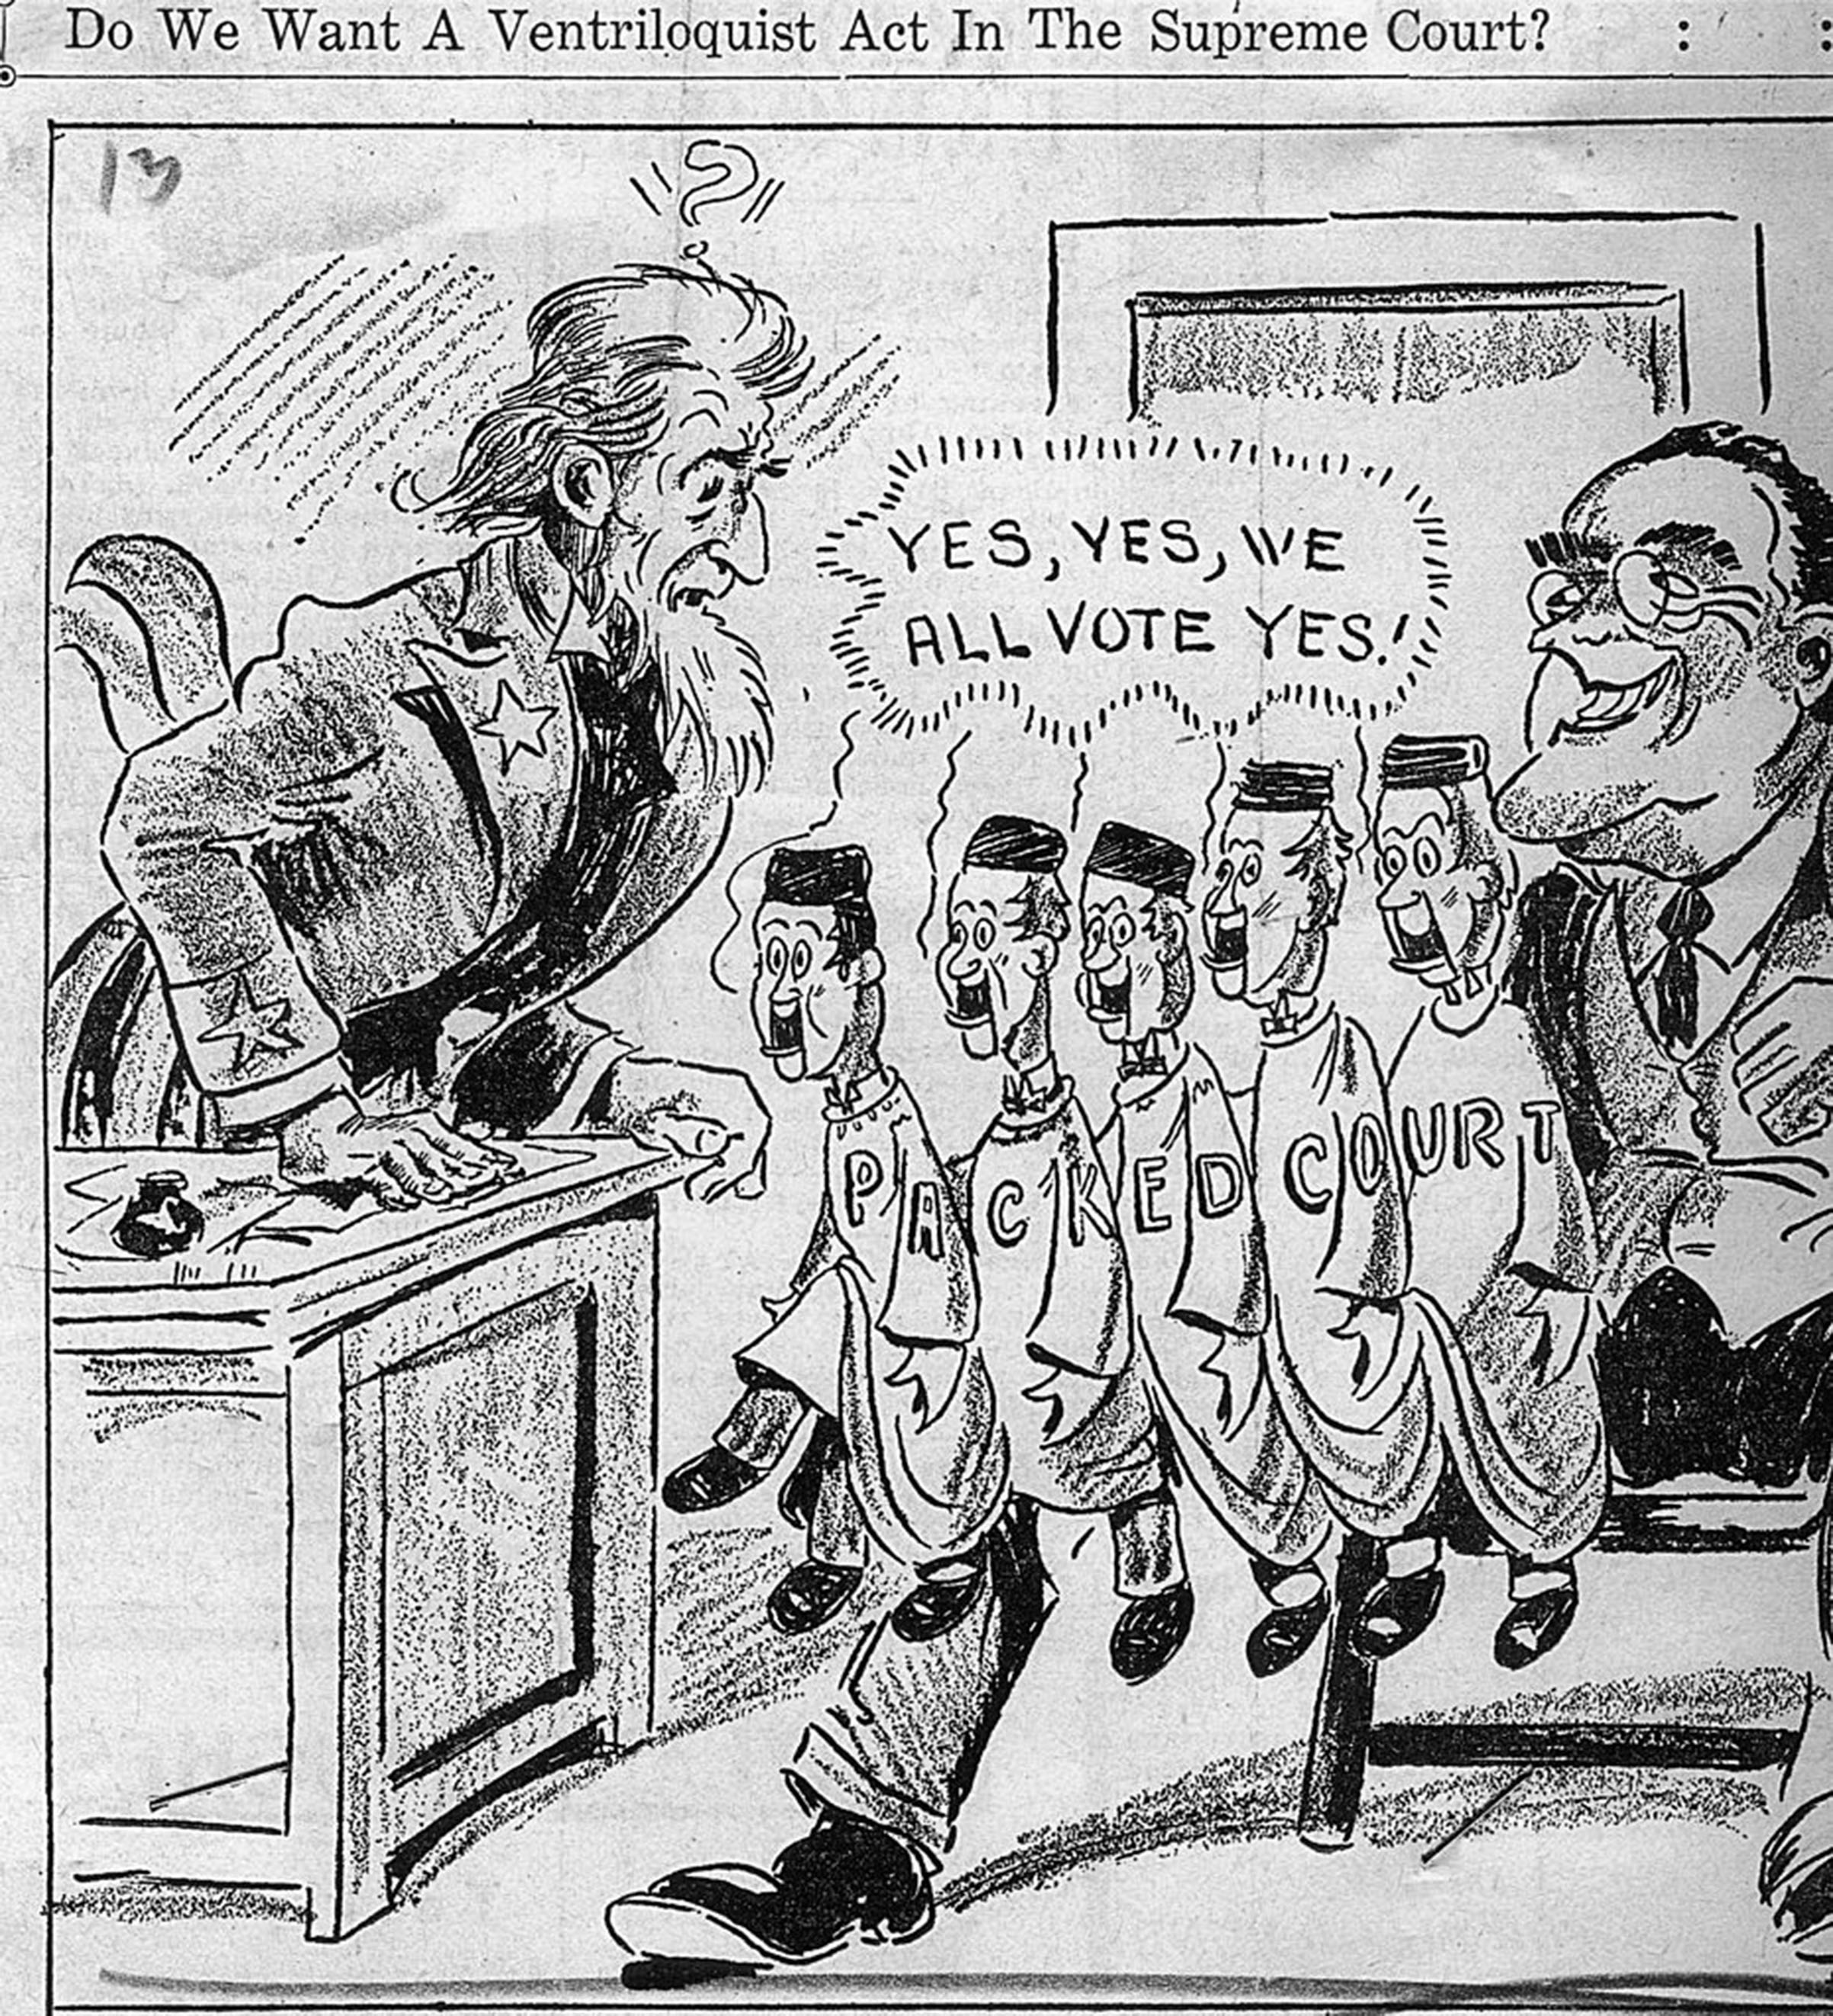 A Feb. 14, 1937, cartoon 'Do We Want A Ventriloquist Act In The Supreme Court?' depicts the five new judges that FDR could potentially point per his proposed court-packing plan as the President's puppets. (Fotosearch—Getty Images)